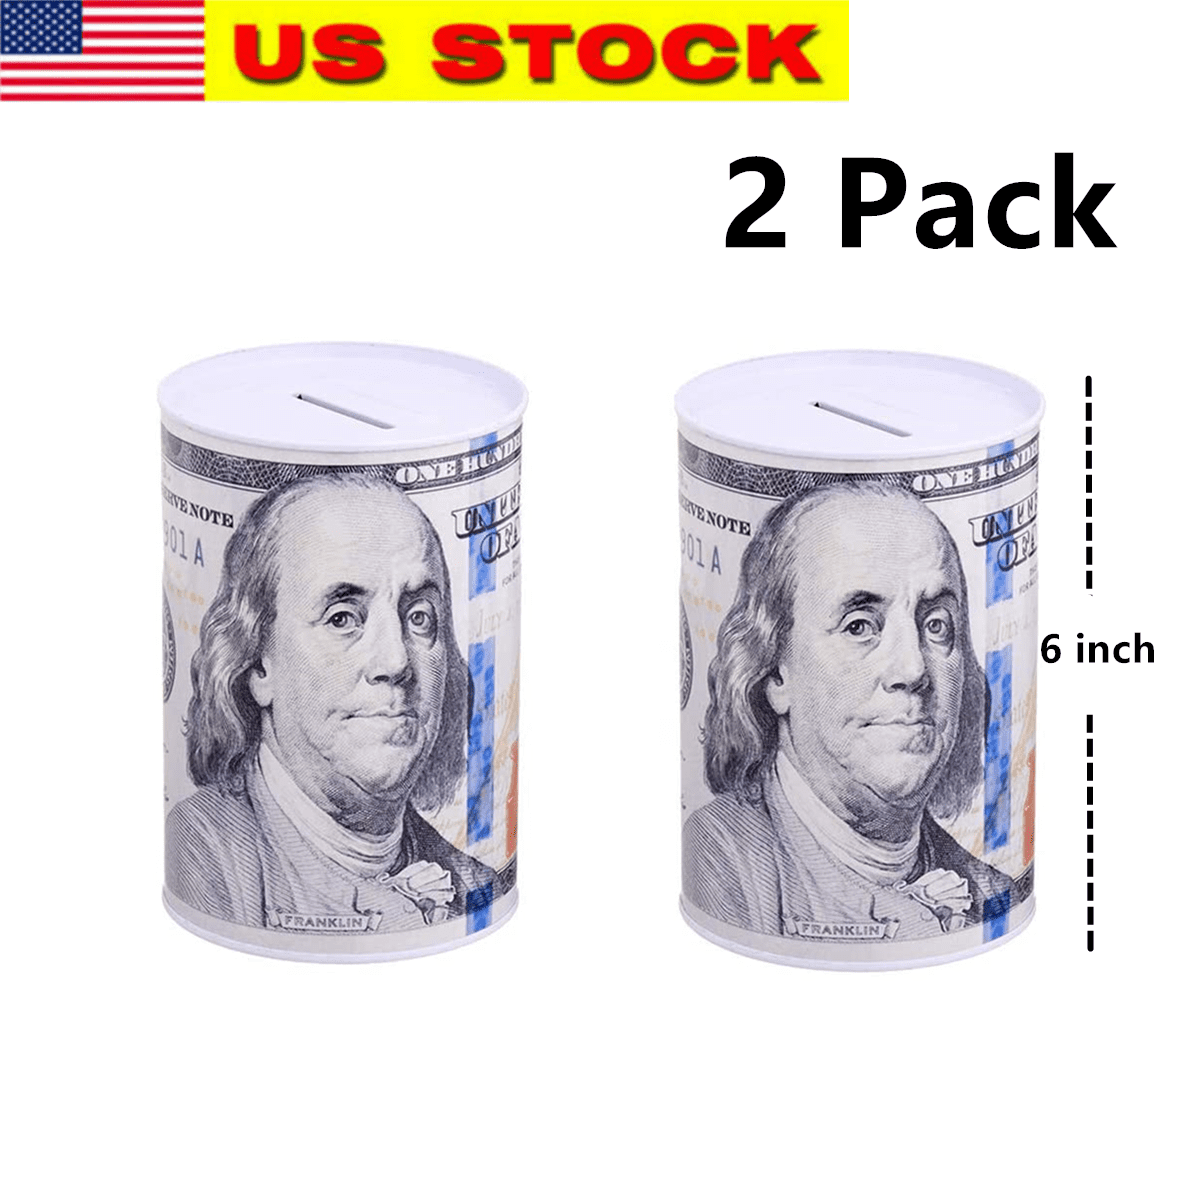 6 Pack $100 Dollar Bill Coin Bank 6 inches Tall Coin Saving Money Currency 